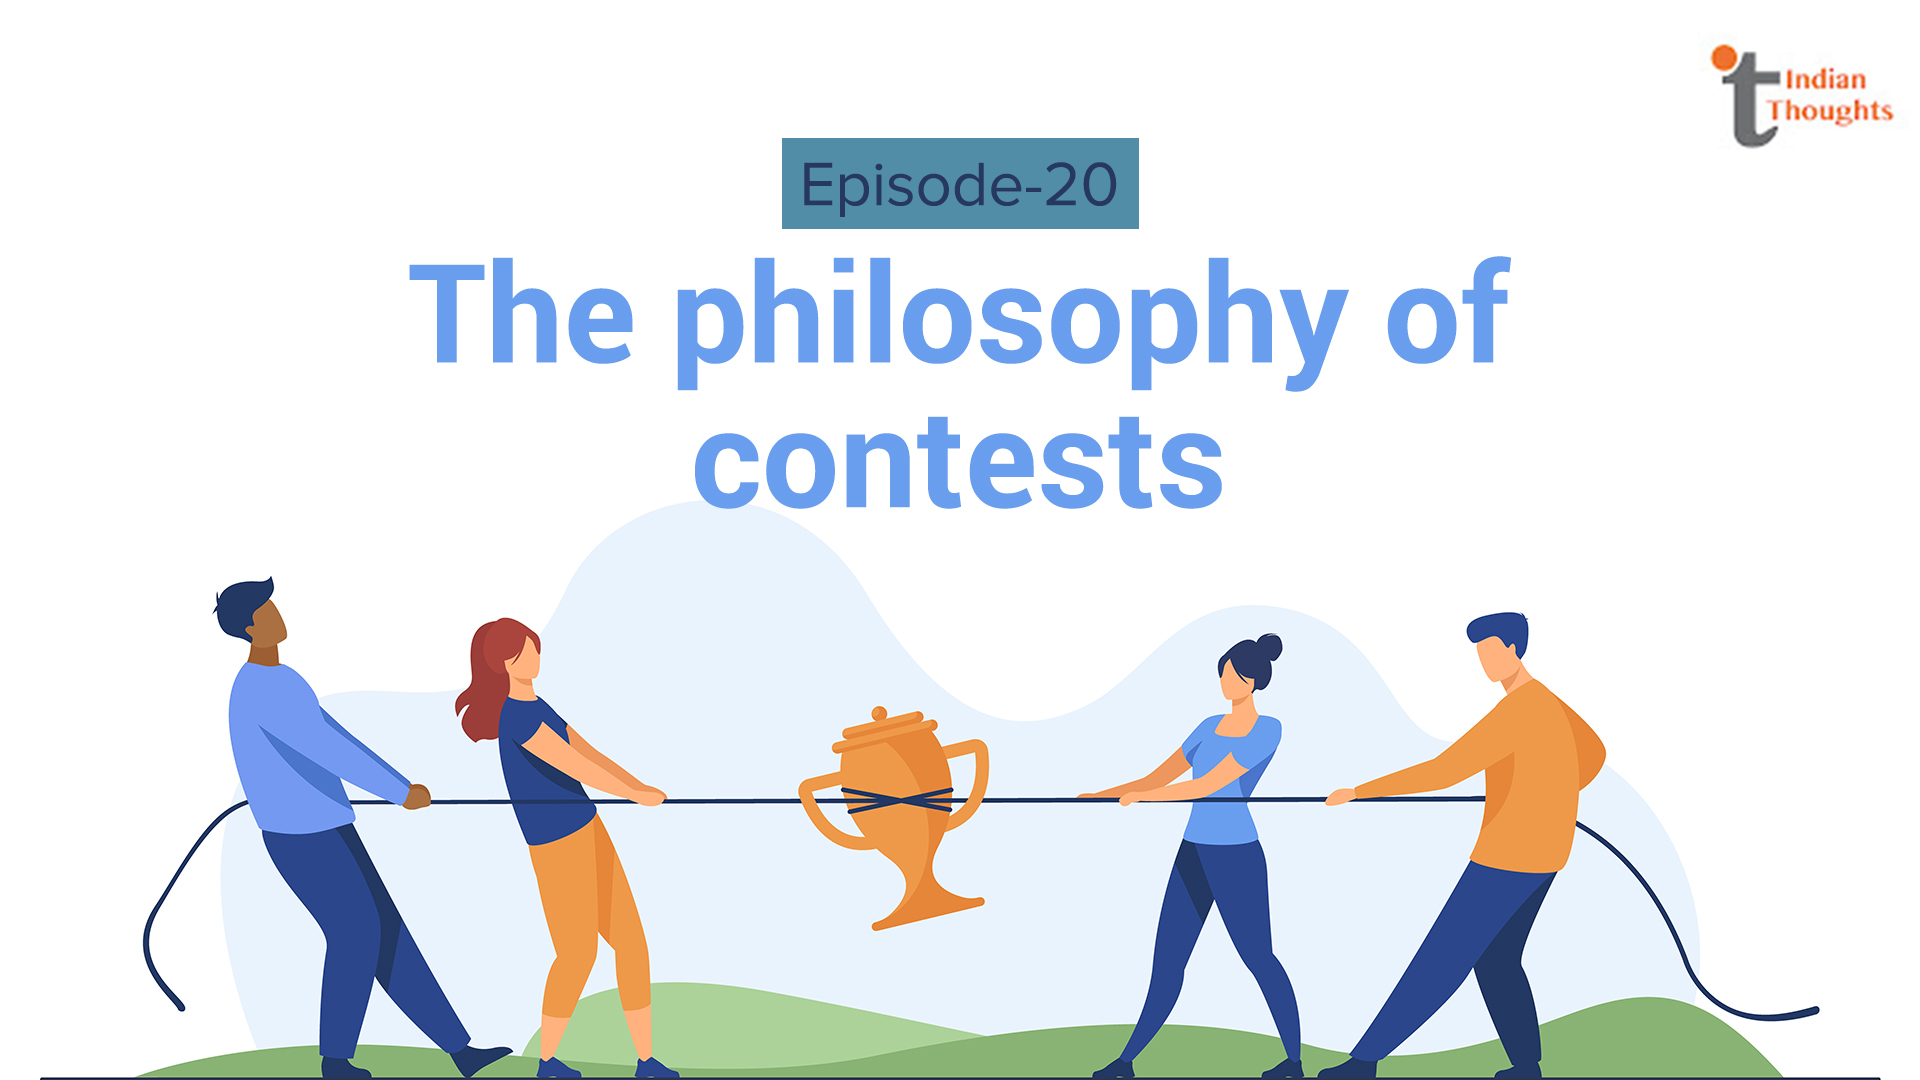 The philosophy of contests